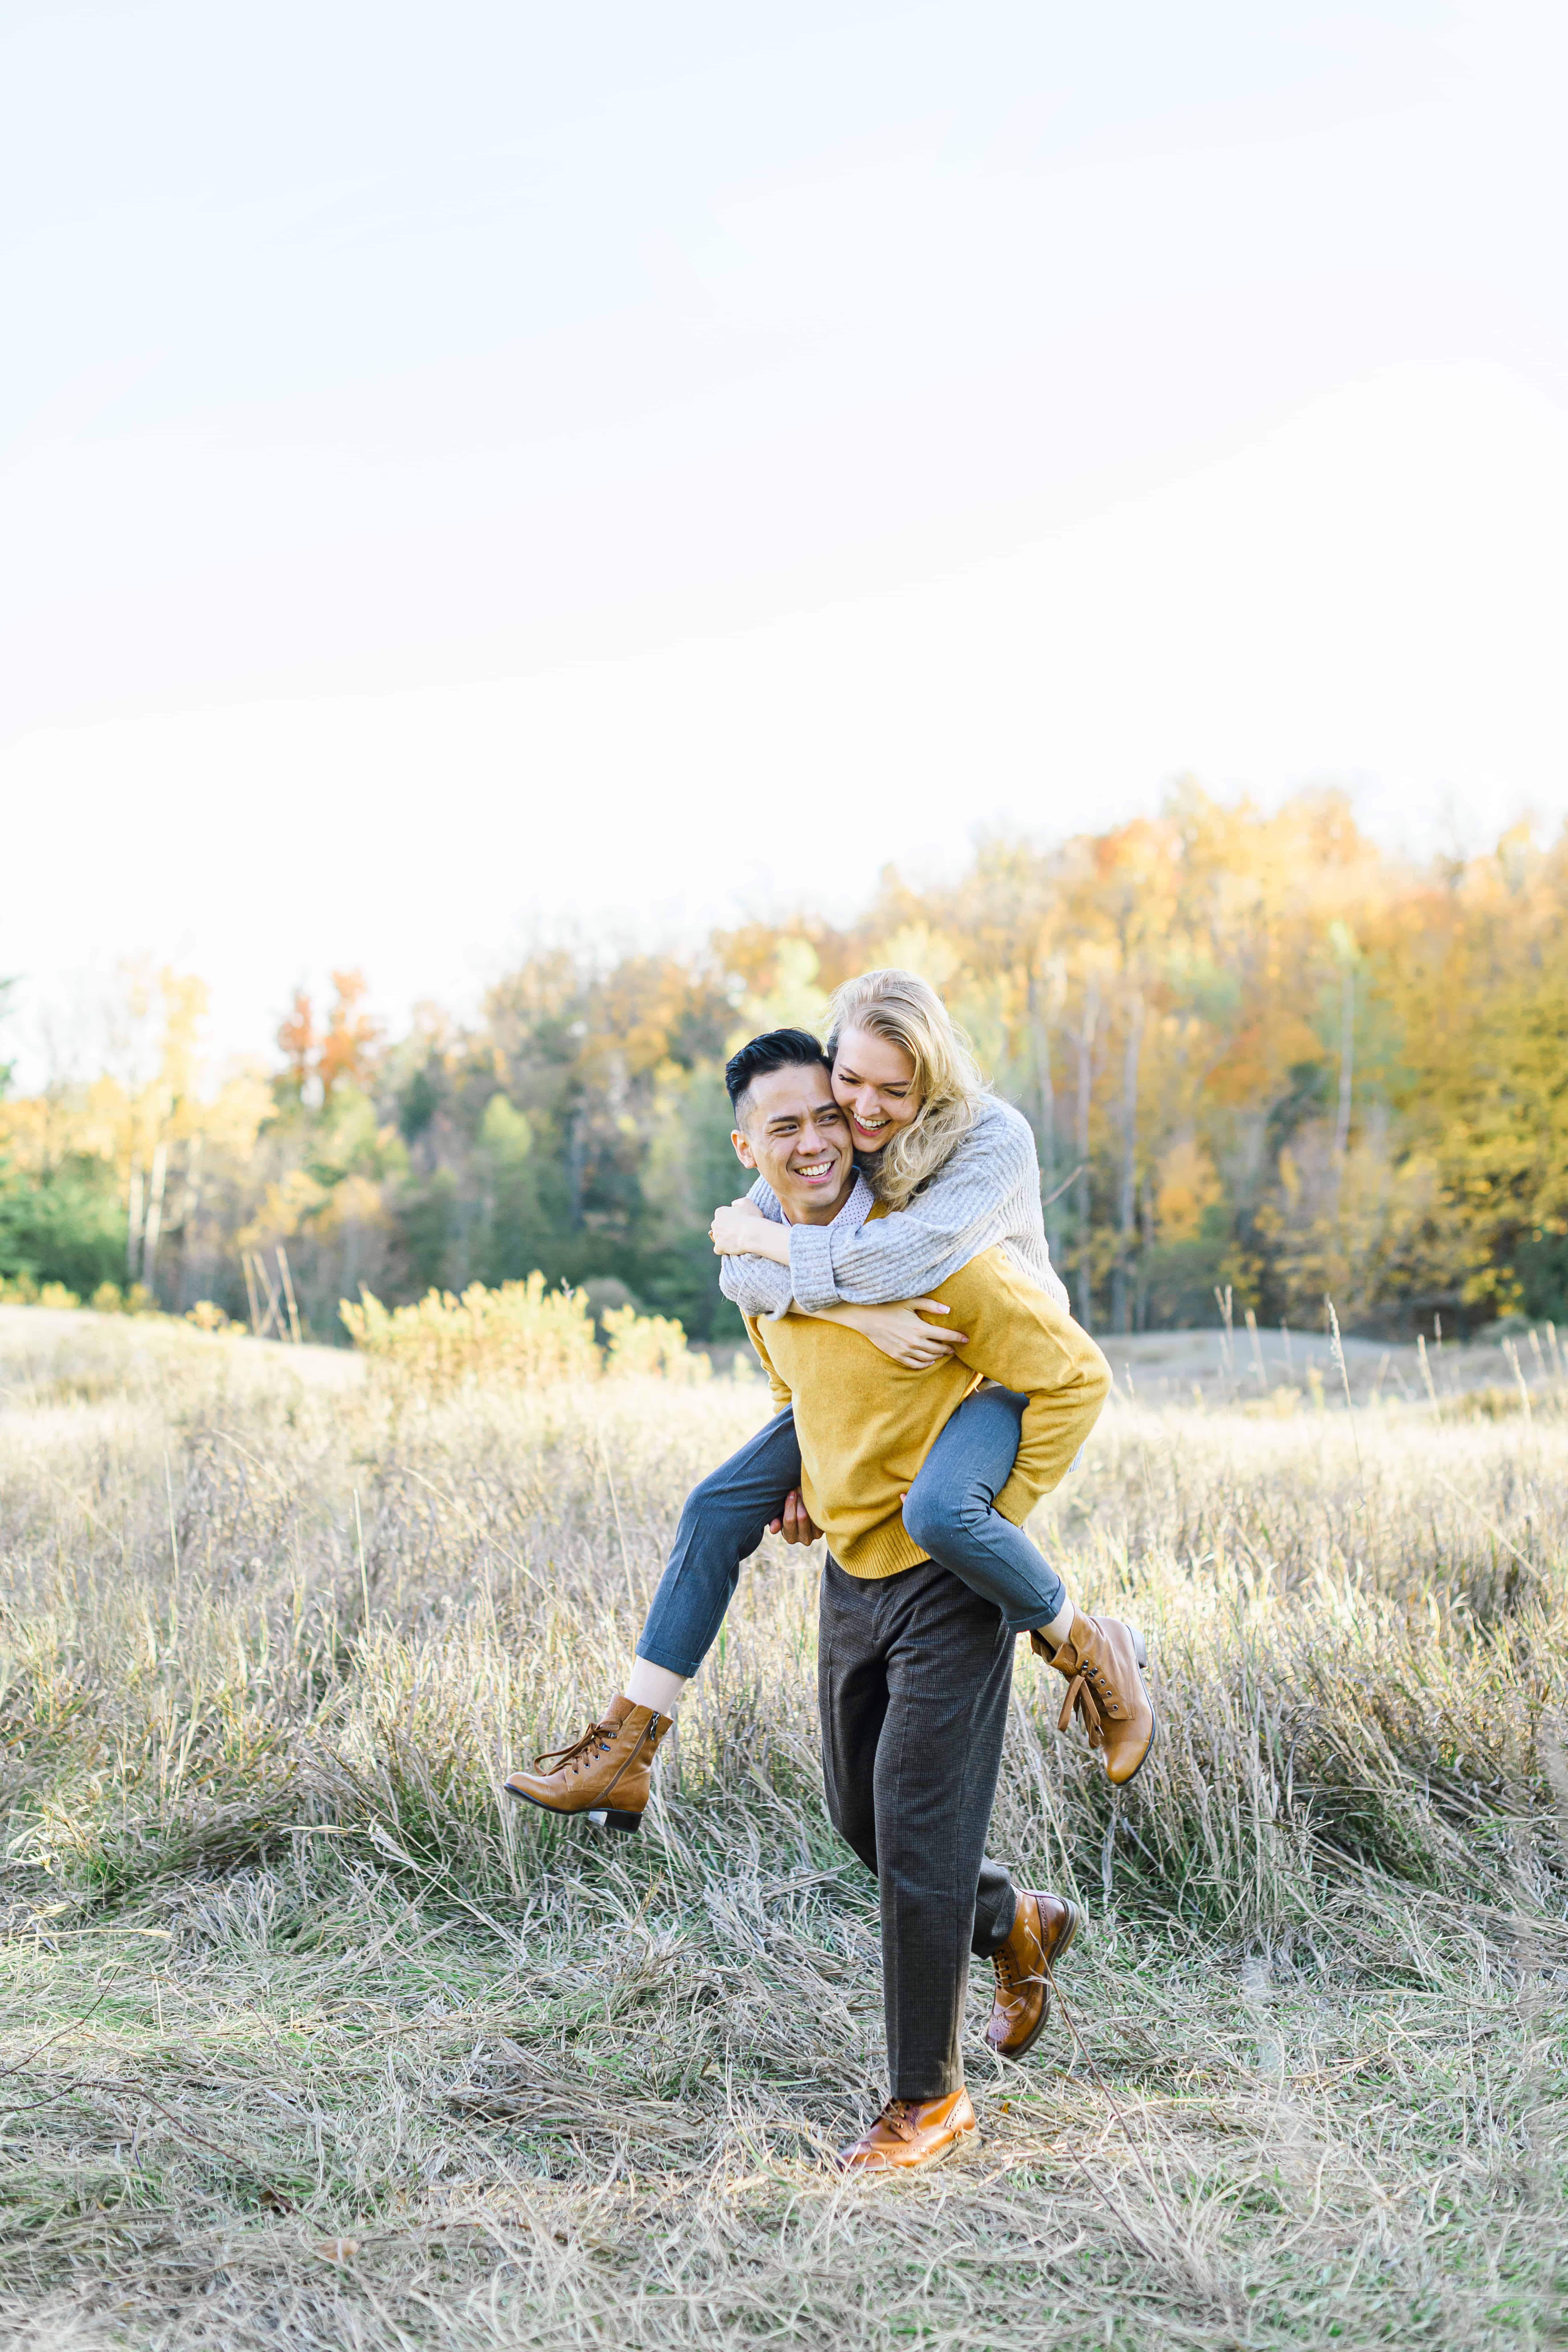 3 reasons why you need engagement photos